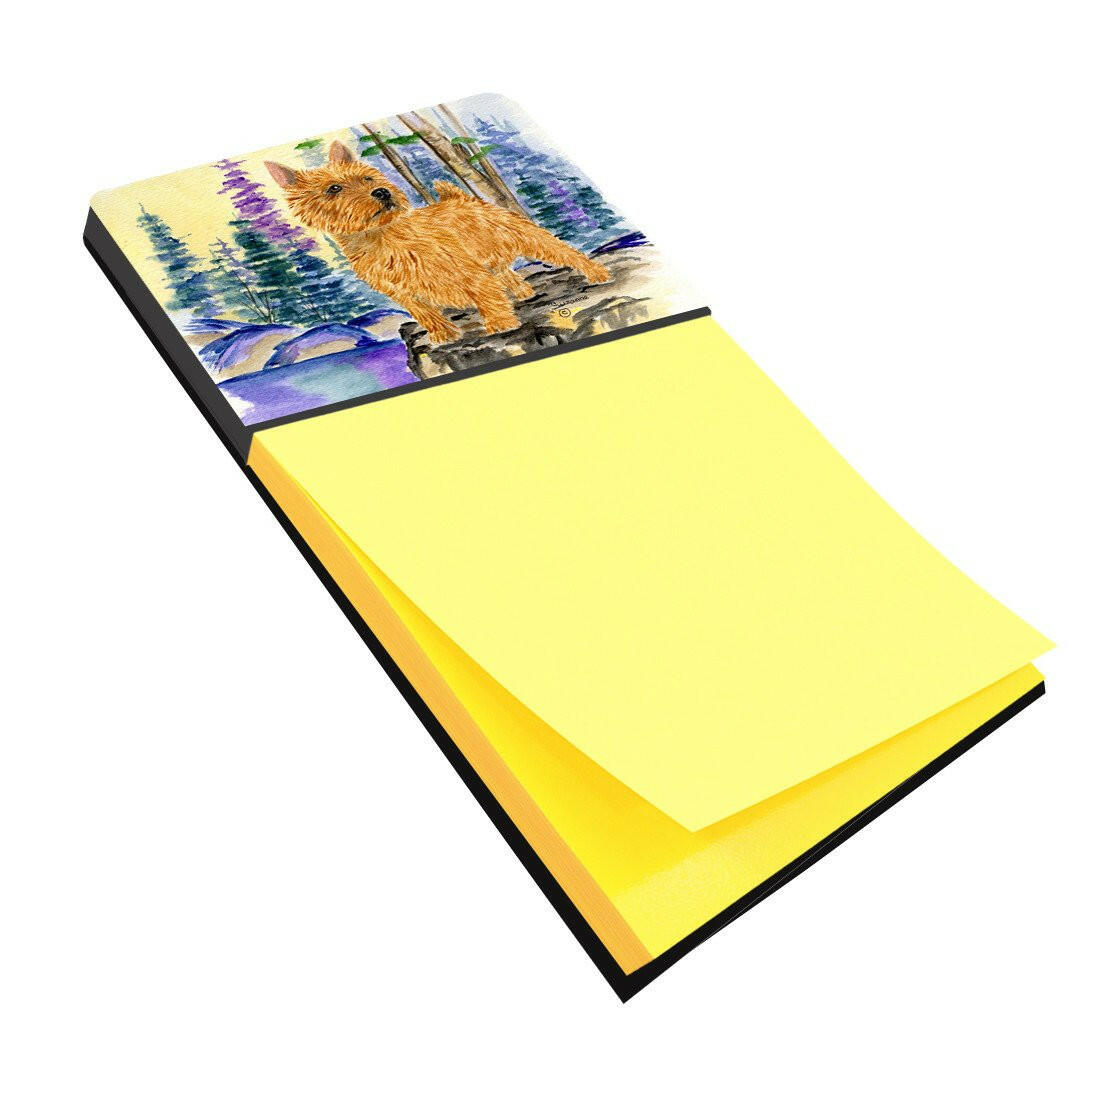 Norwich Terrier Refiillable Sticky Note Holder or Postit Note Dispenser SS8011SN by Caroline's Treasures